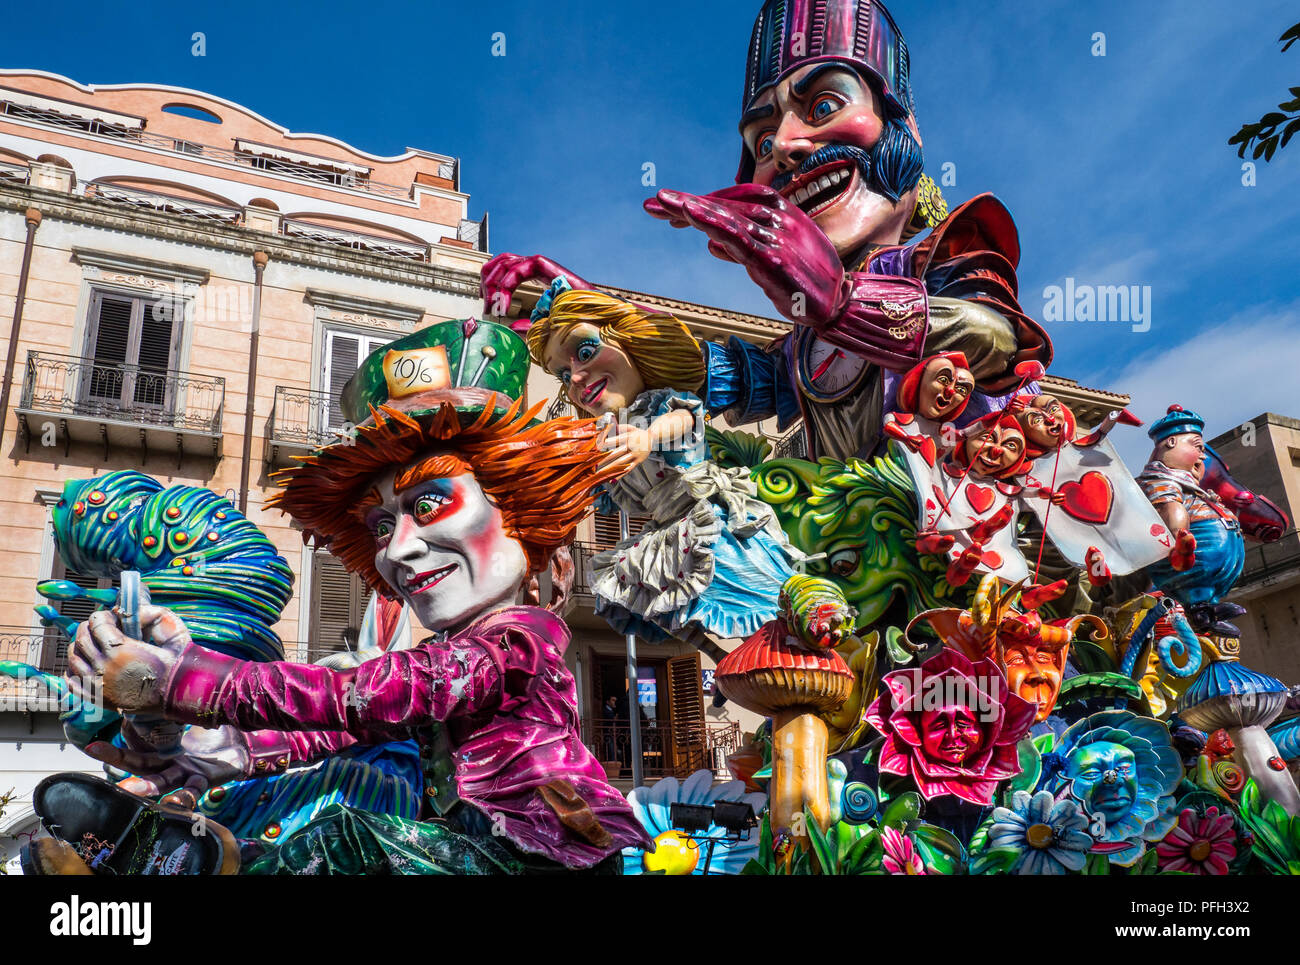 Sciacca, Agrigento, Italy, January, 2018. Carts with colourful sculptures in the fantastic carnival that takes place every year in Sciacca, Sicily Stock Photo